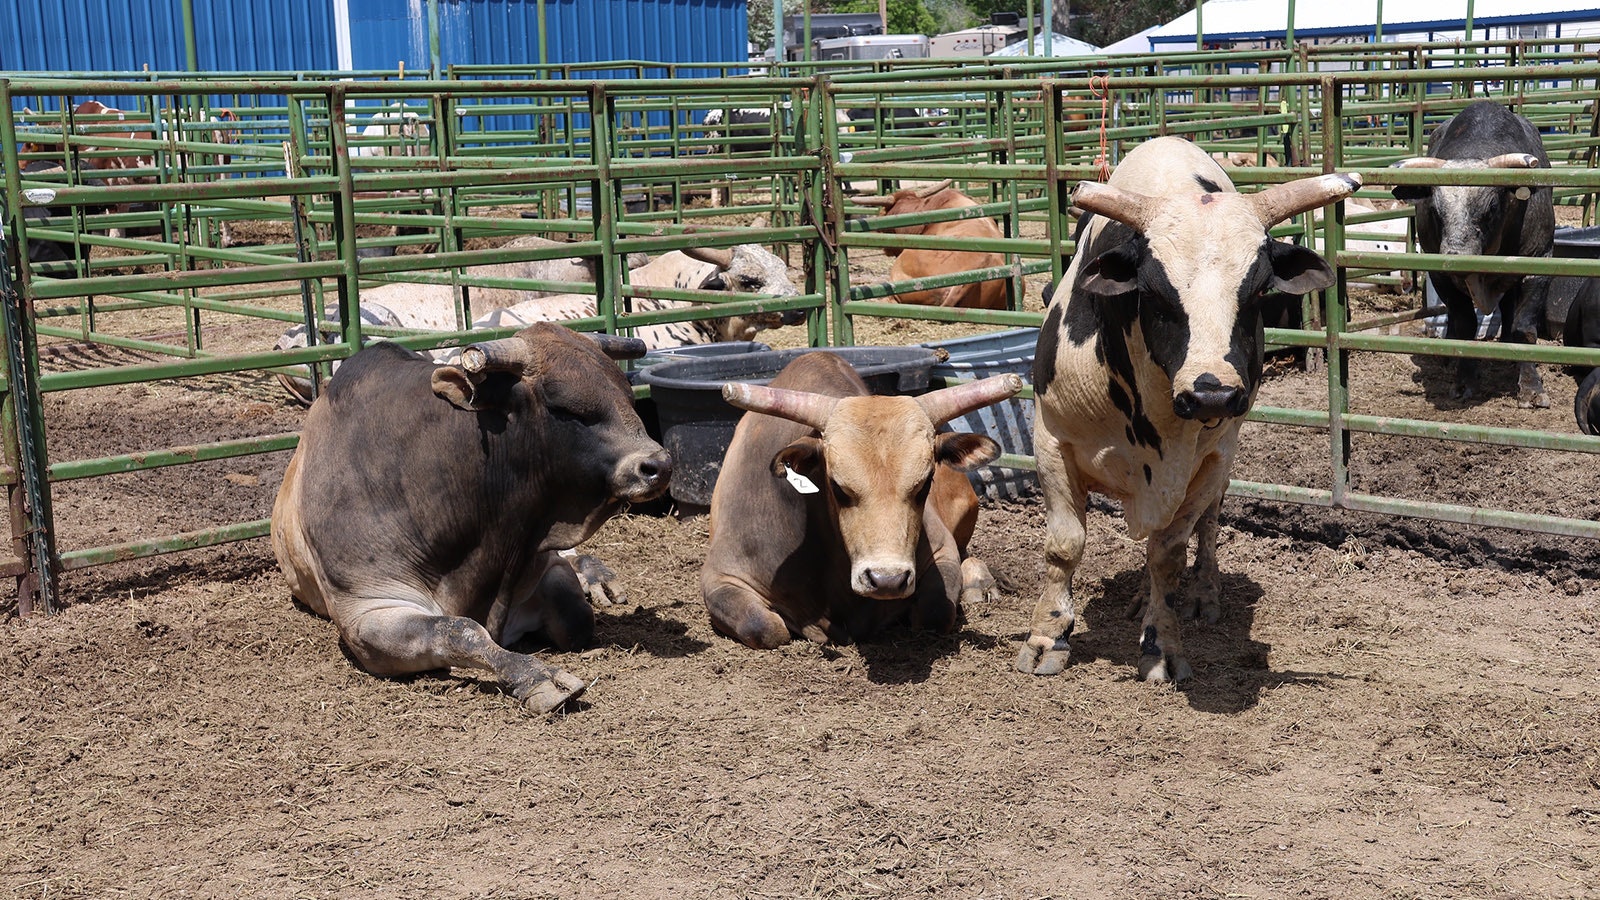 Not all bulls get along. These three do. College National Finals Rodeo contractor Kirsten Vold said part of her efforts are aimed at keeping things peaceful in the bull pens.